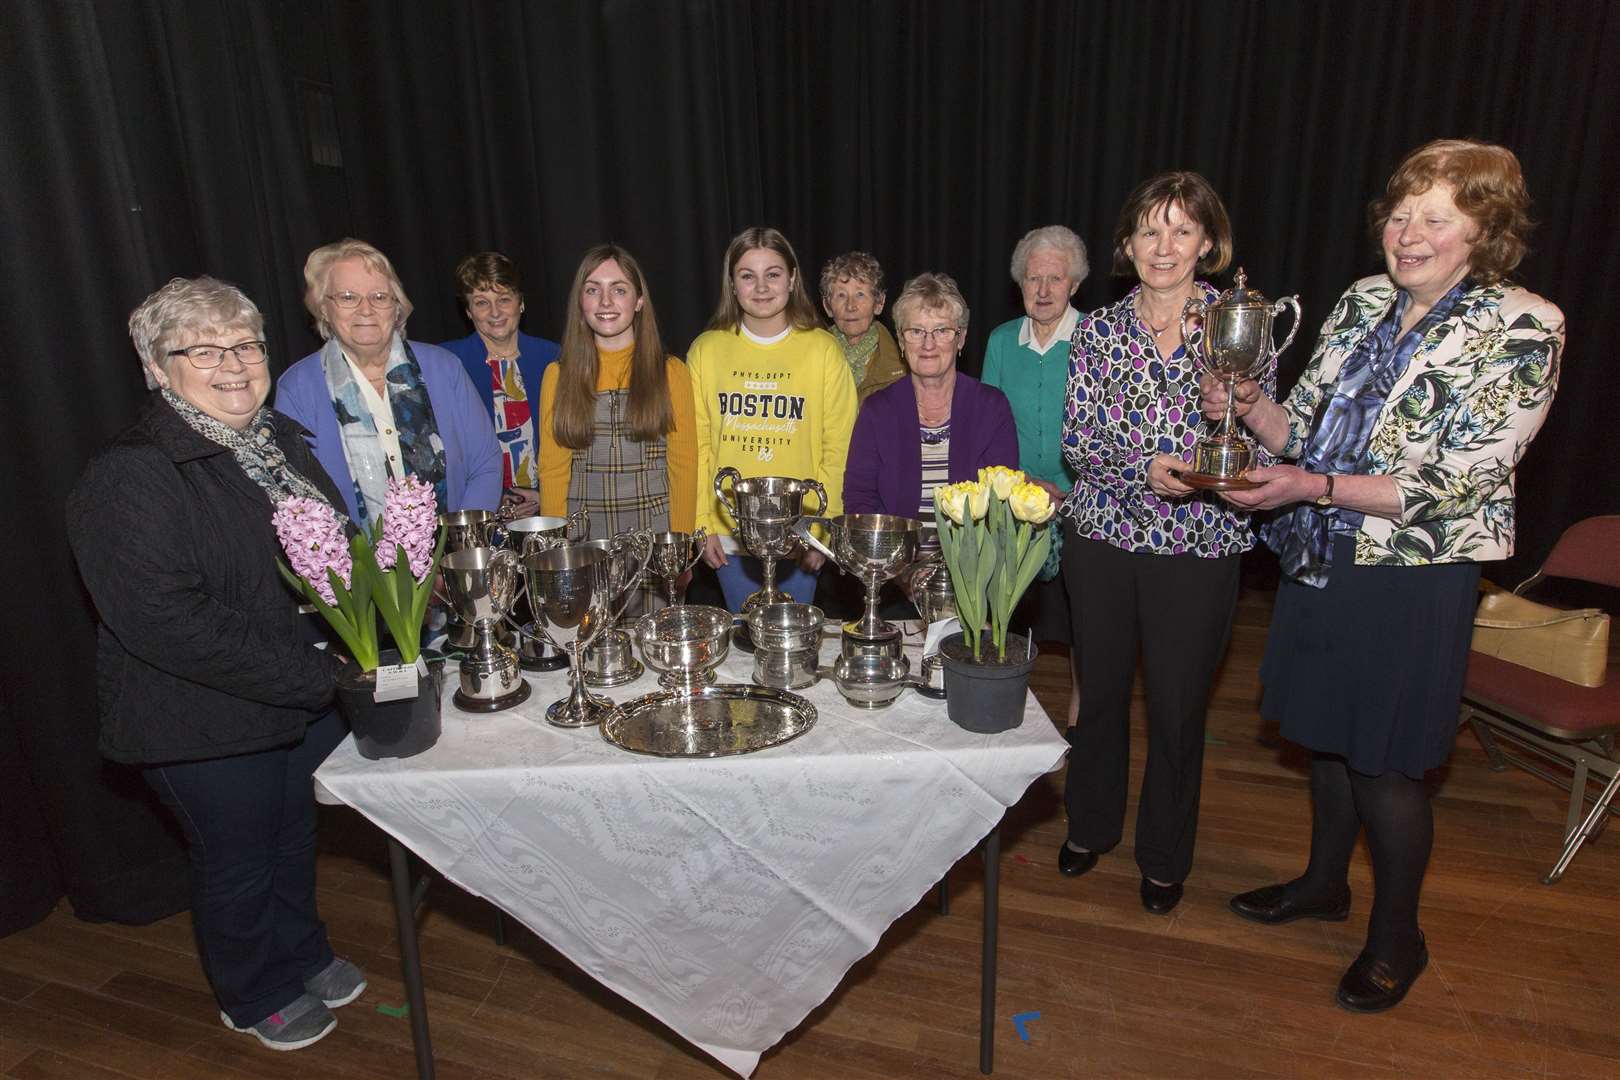 Flashback to early March 2020 and the last East of Caithness SWI Bulb Show in Wick Assembly Rooms. It was opened by Islay MacLeod (right), of Thrumster House, who also presented the winners with their trophies. Picture: Robert MacDonald / Northern Studios